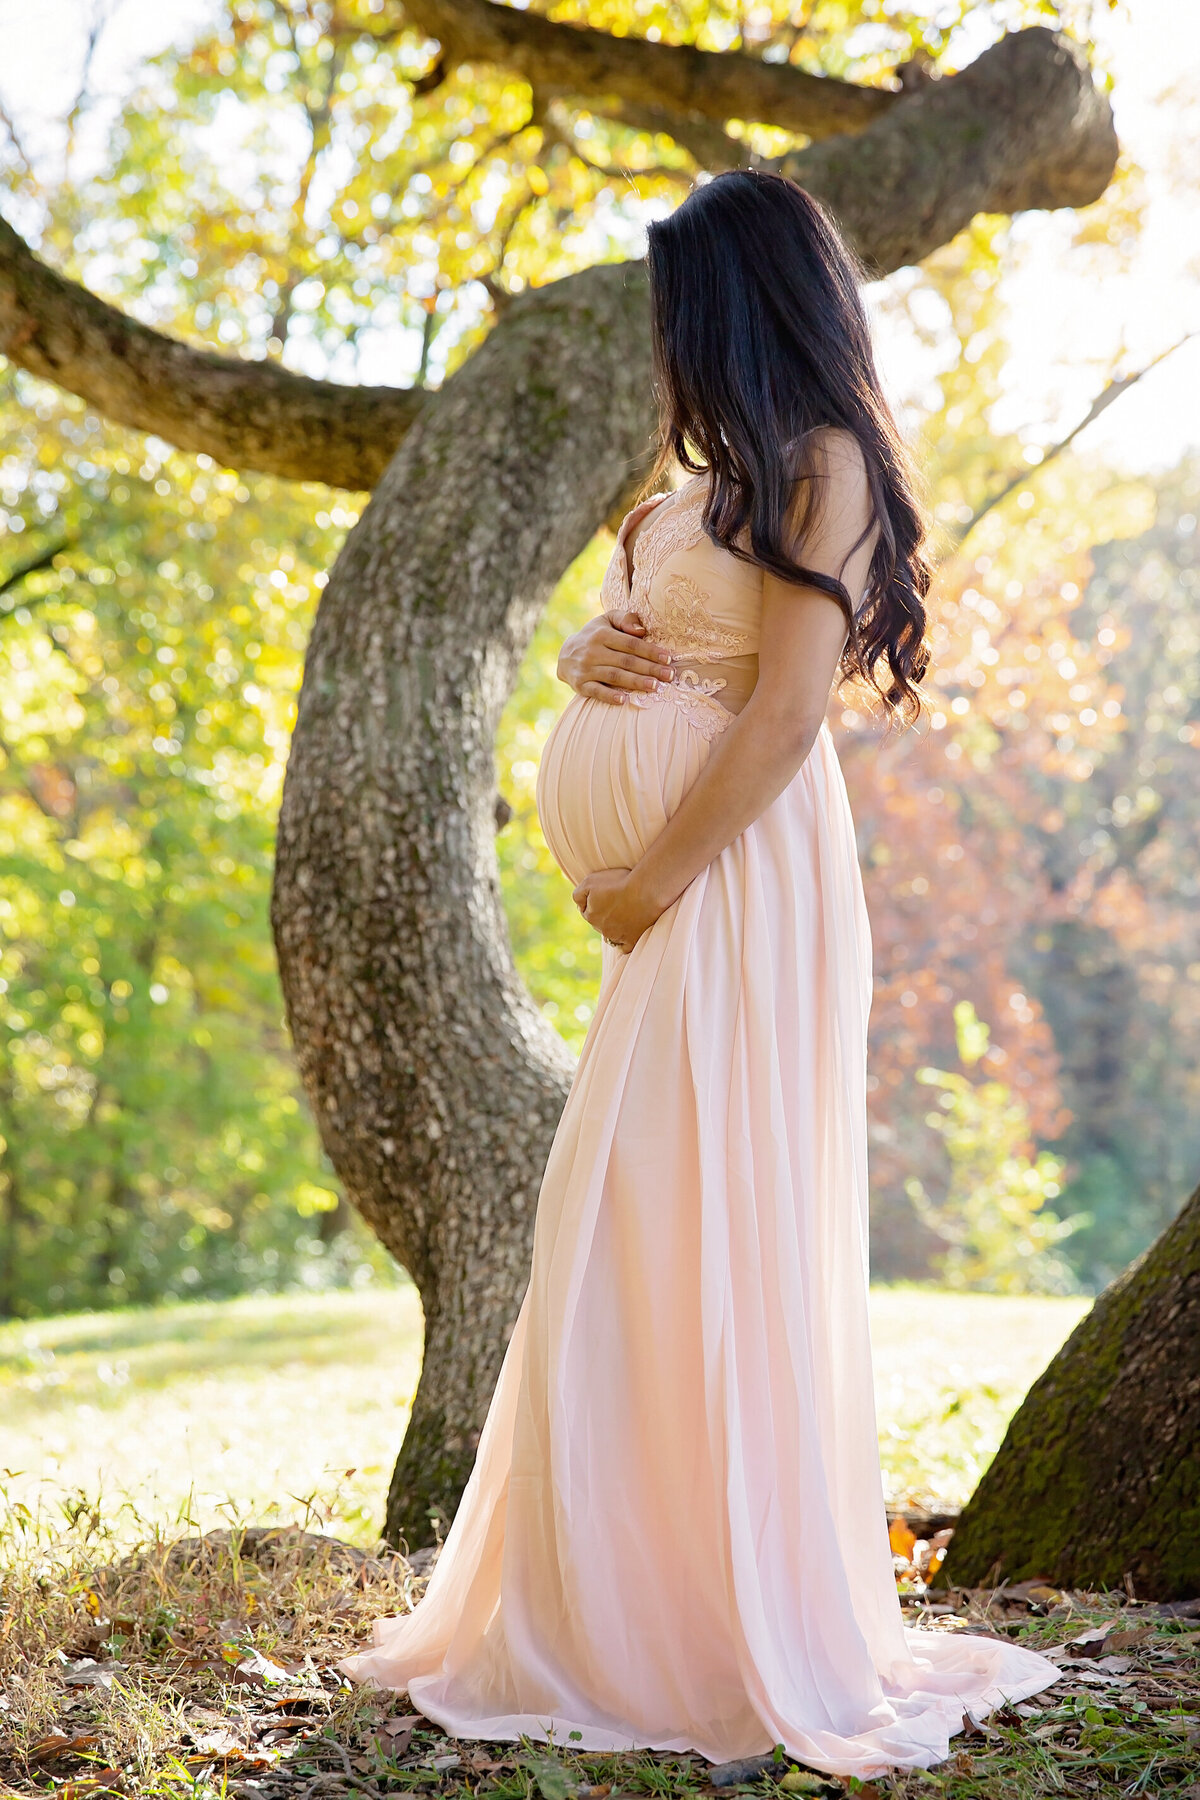 Ashley-Beaman-Photography-Gallery-Top-for-30a-South-Walton-Florida-Lifestyle-Maternity-Military-Photographer-2